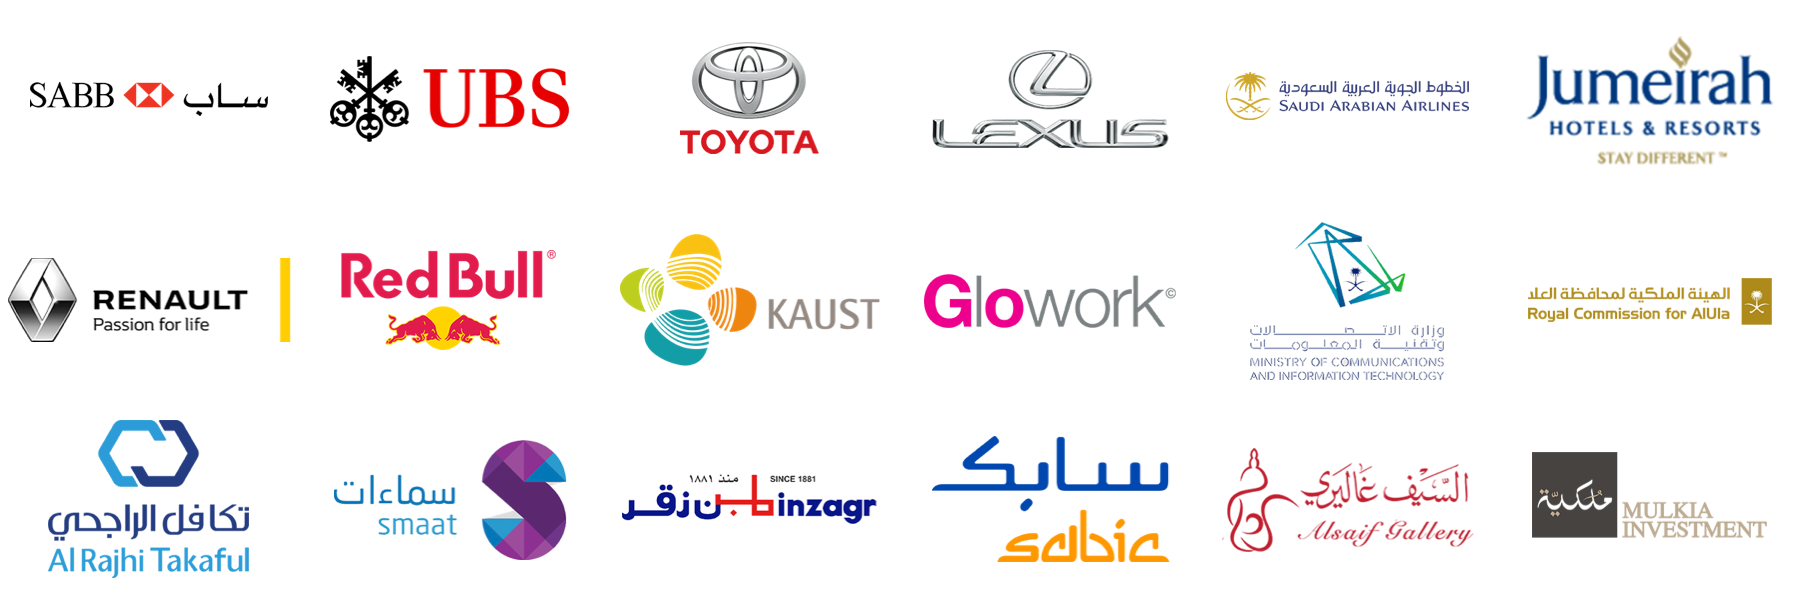 We worked with the best companies on the region - Sabic, KAUST, UBS and more